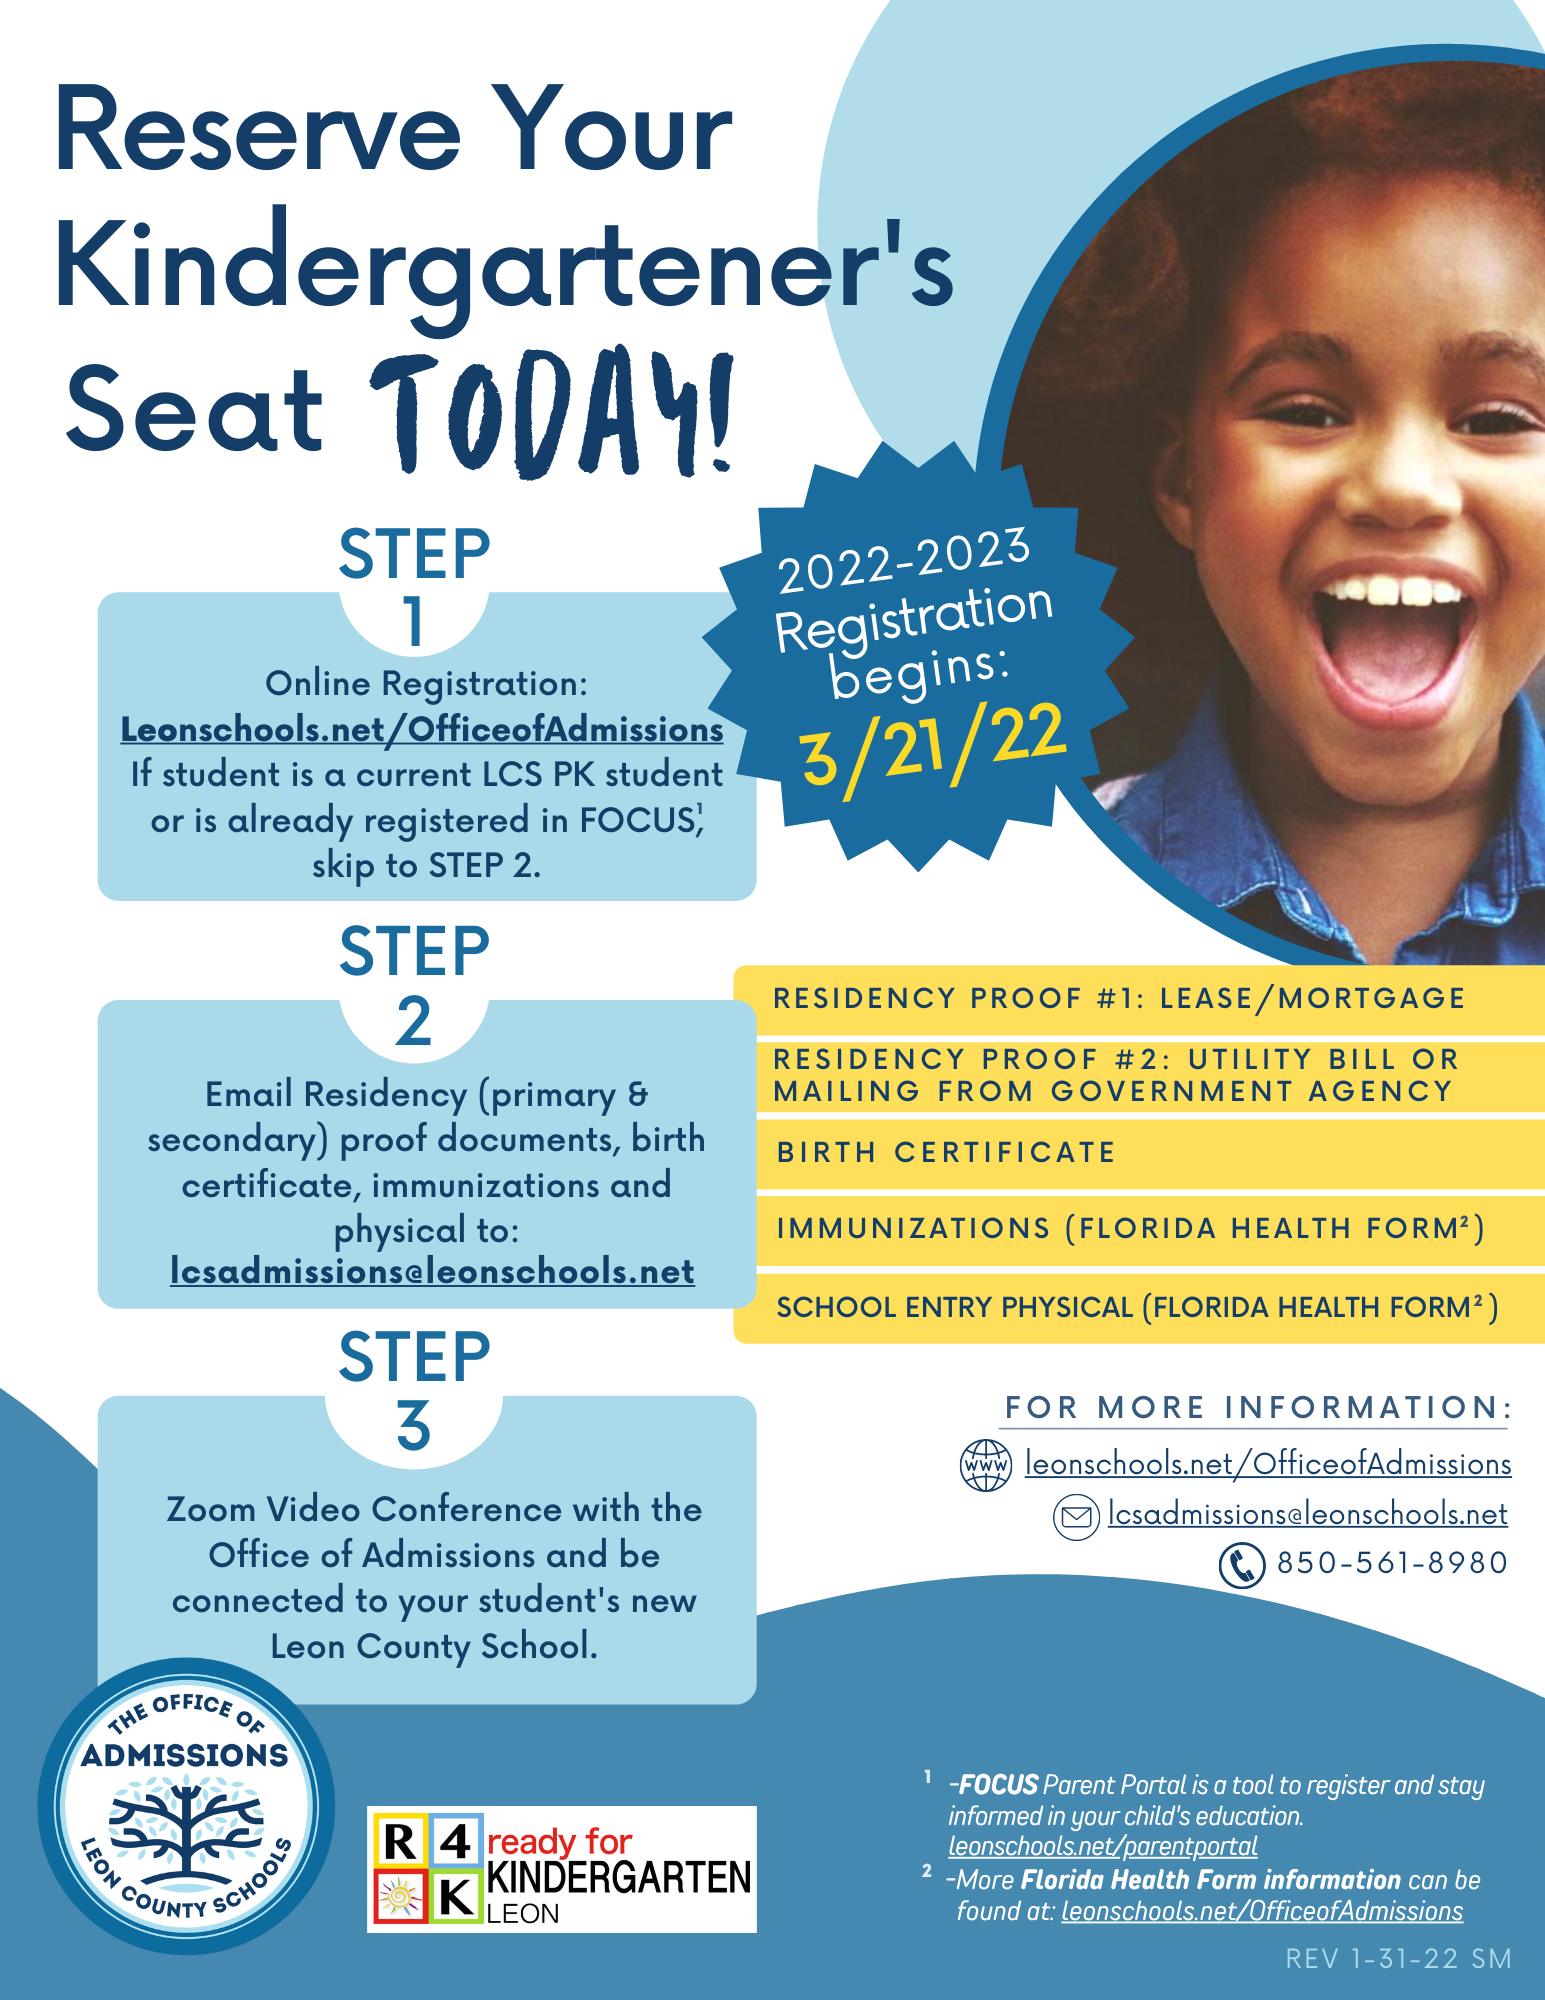 https://ixzucm.stripocdn.email/content/guids/CABINET_4ab44fd0abee8611b0022c5cac0618f3/images/register_for_kindergarten_p.png